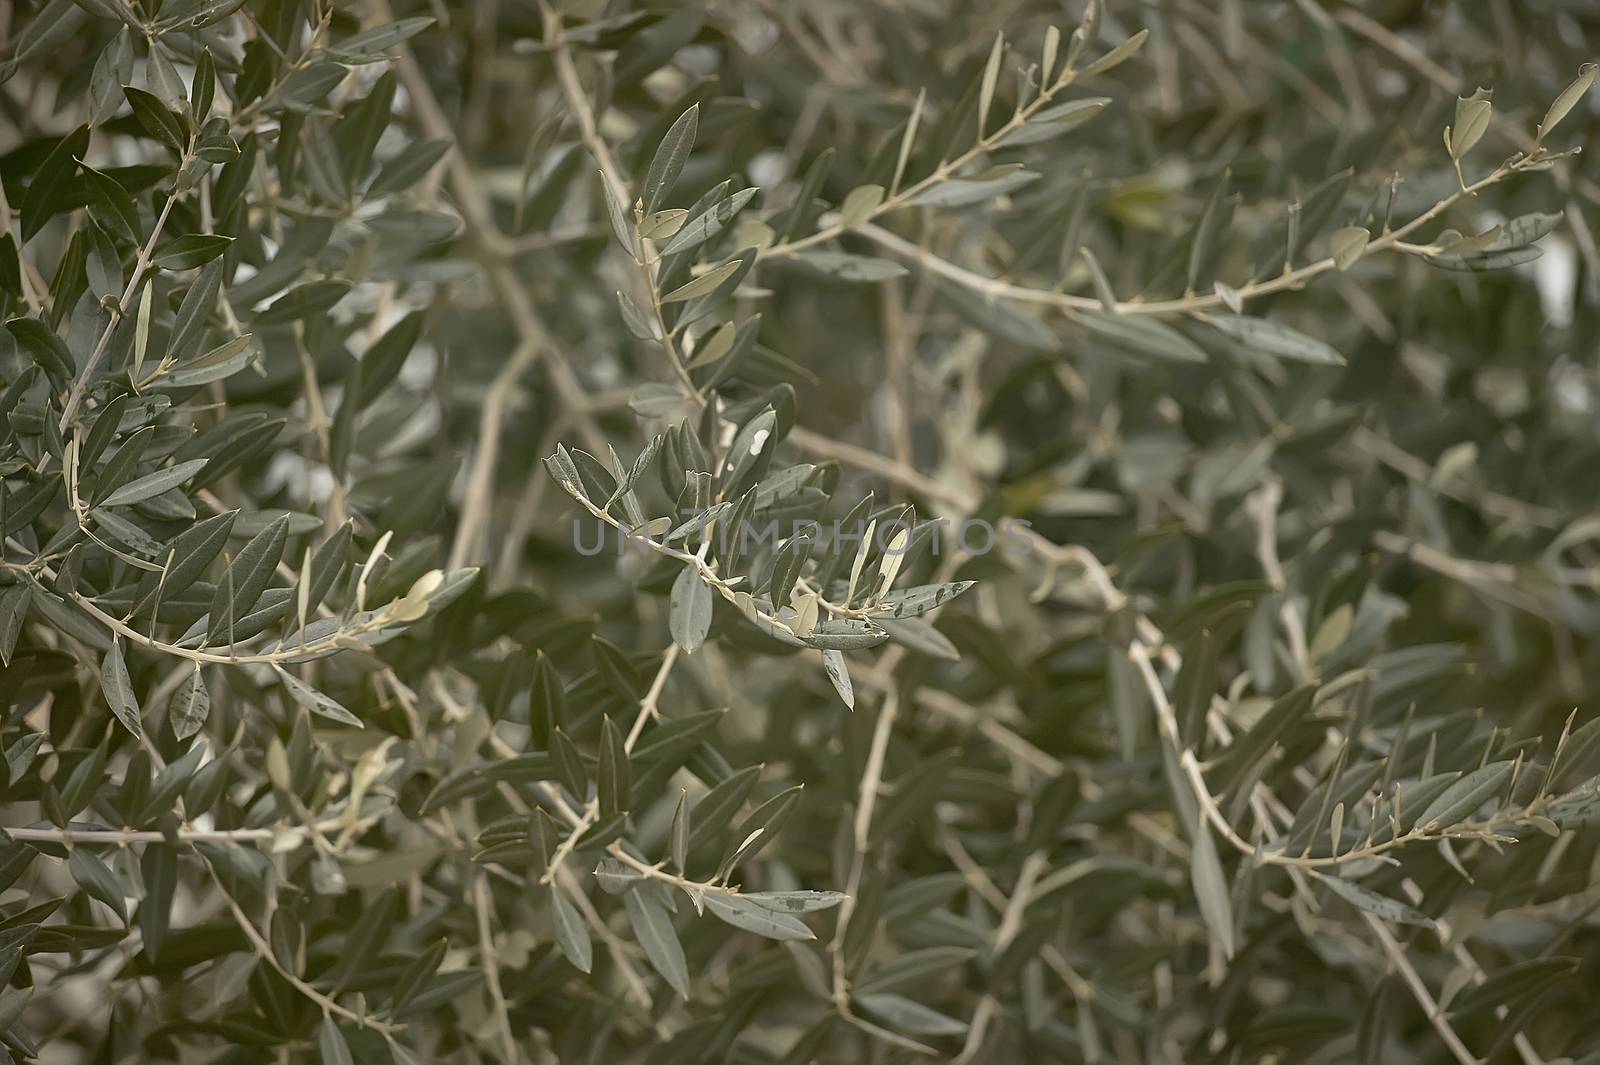 Detail of some branches and leaves of the olive tree plant.